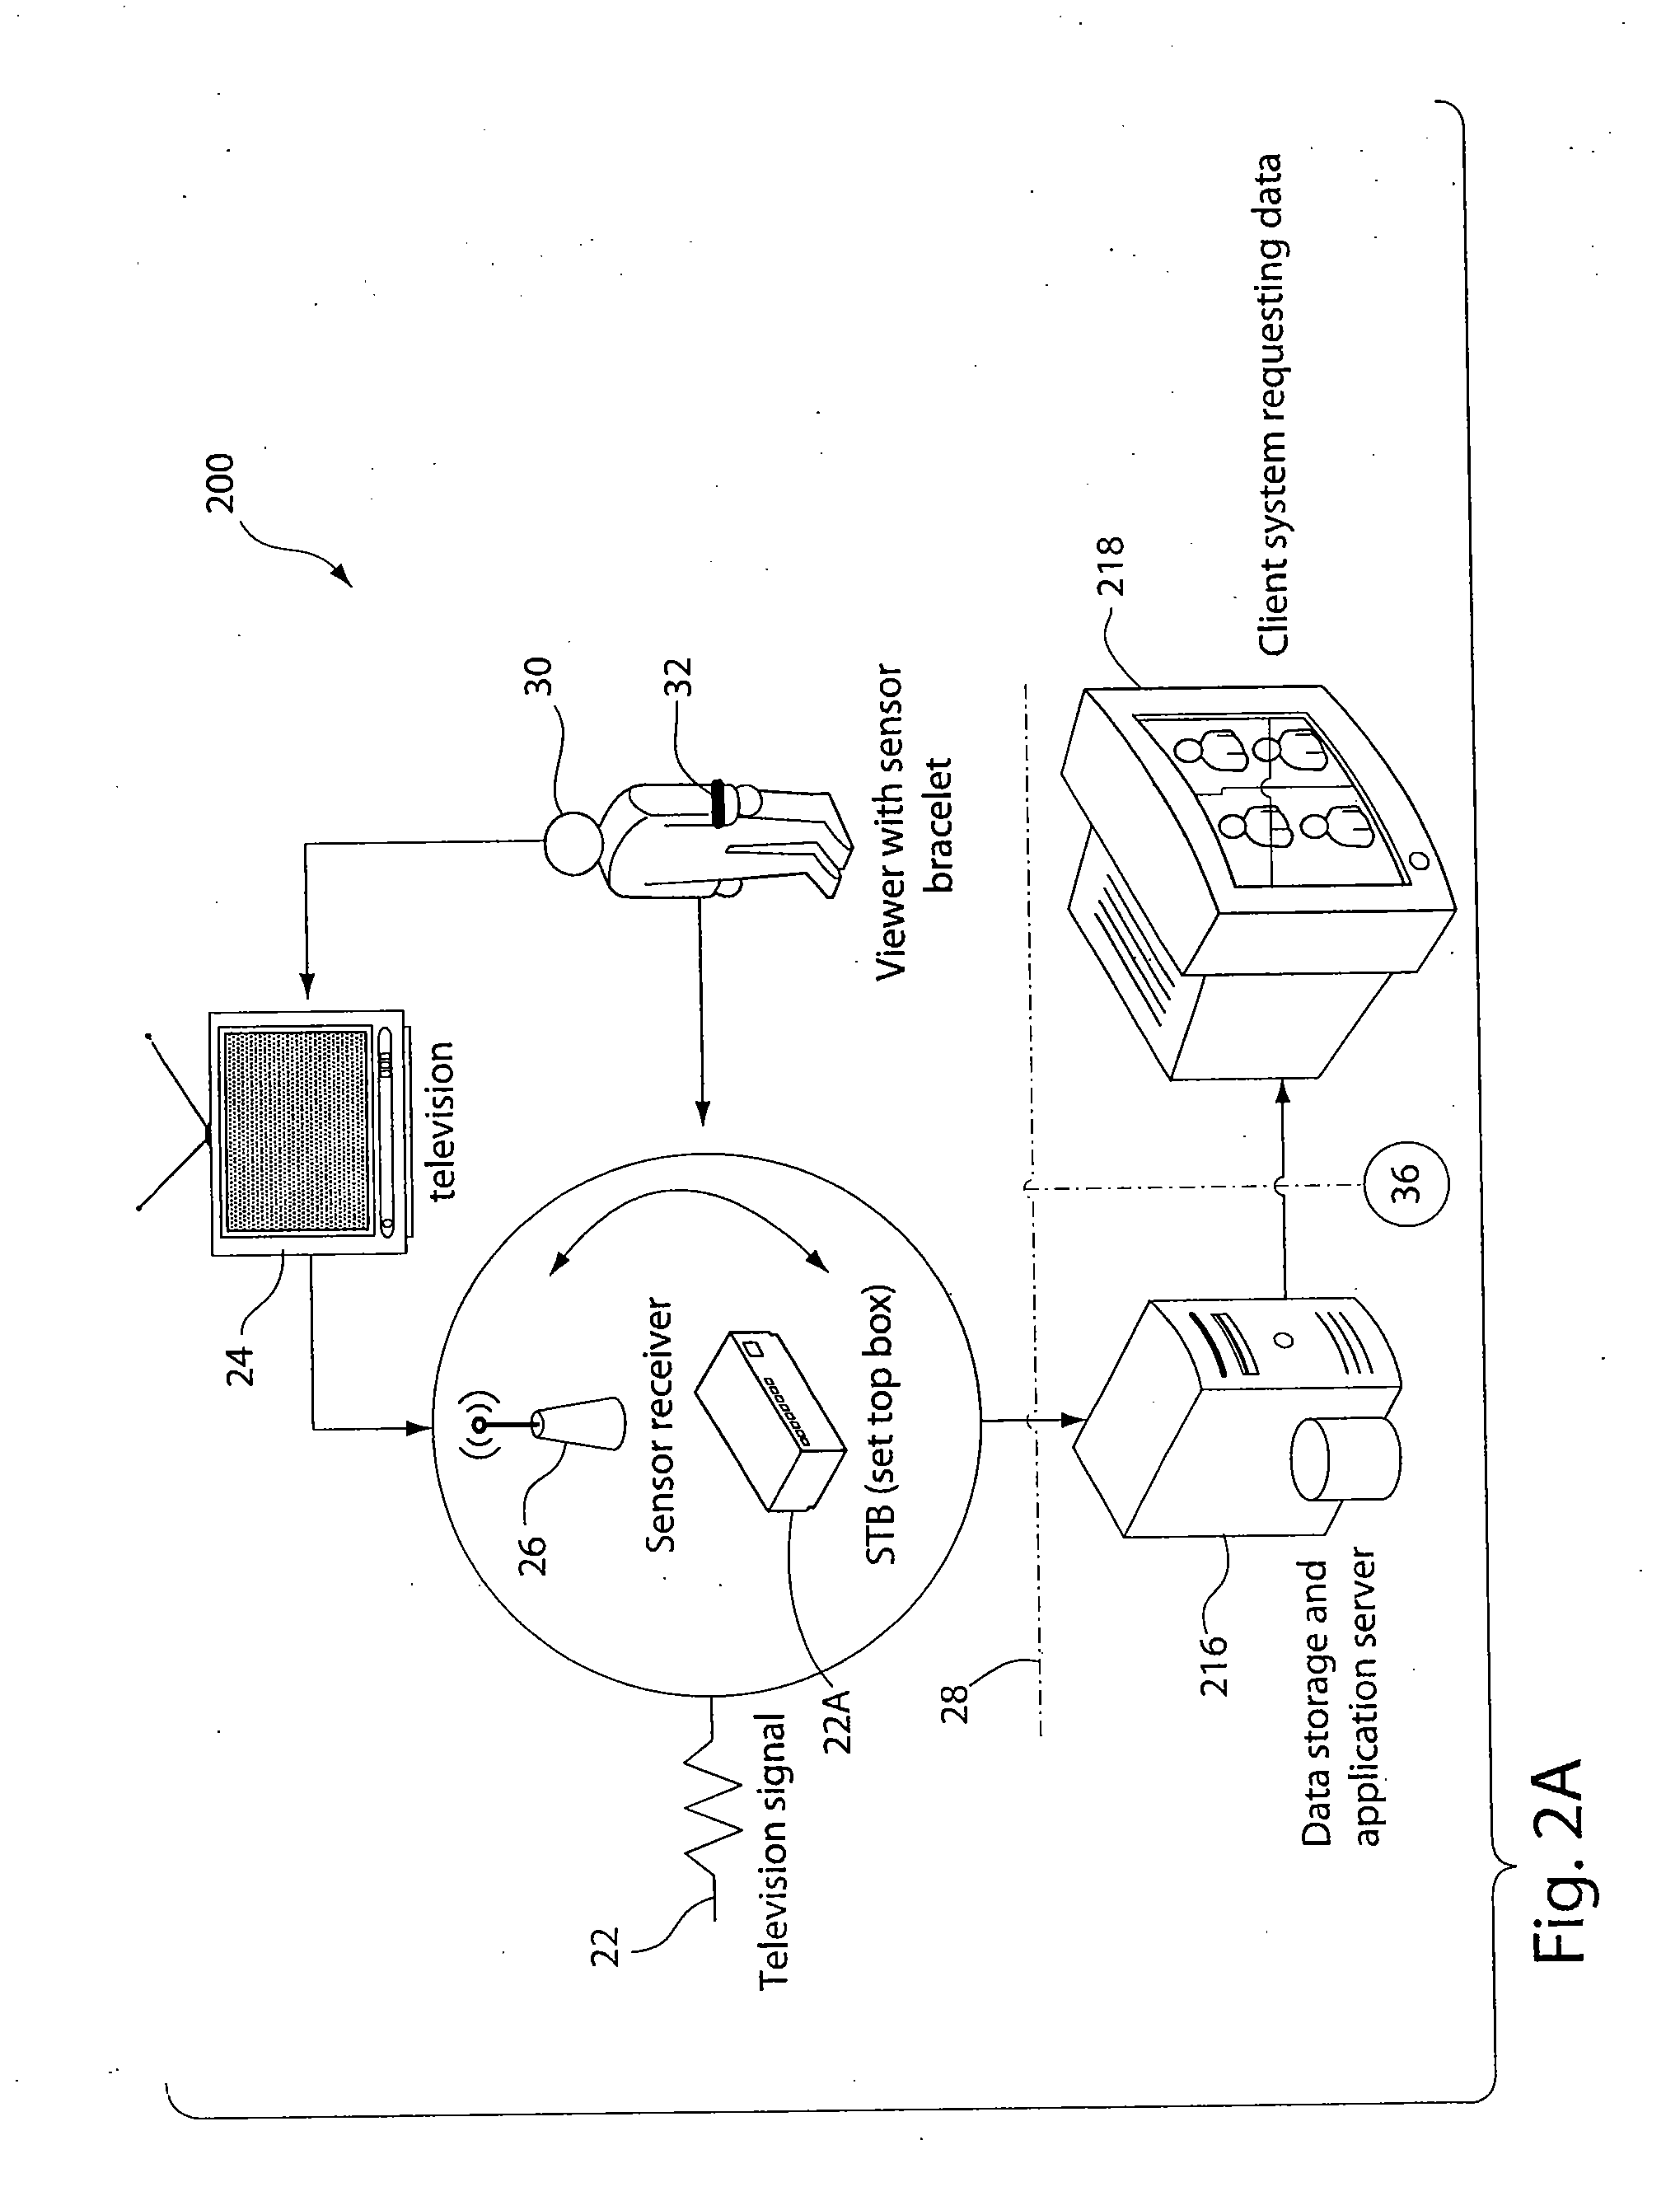 Method and System for Predicting Audience Viewing Behavior